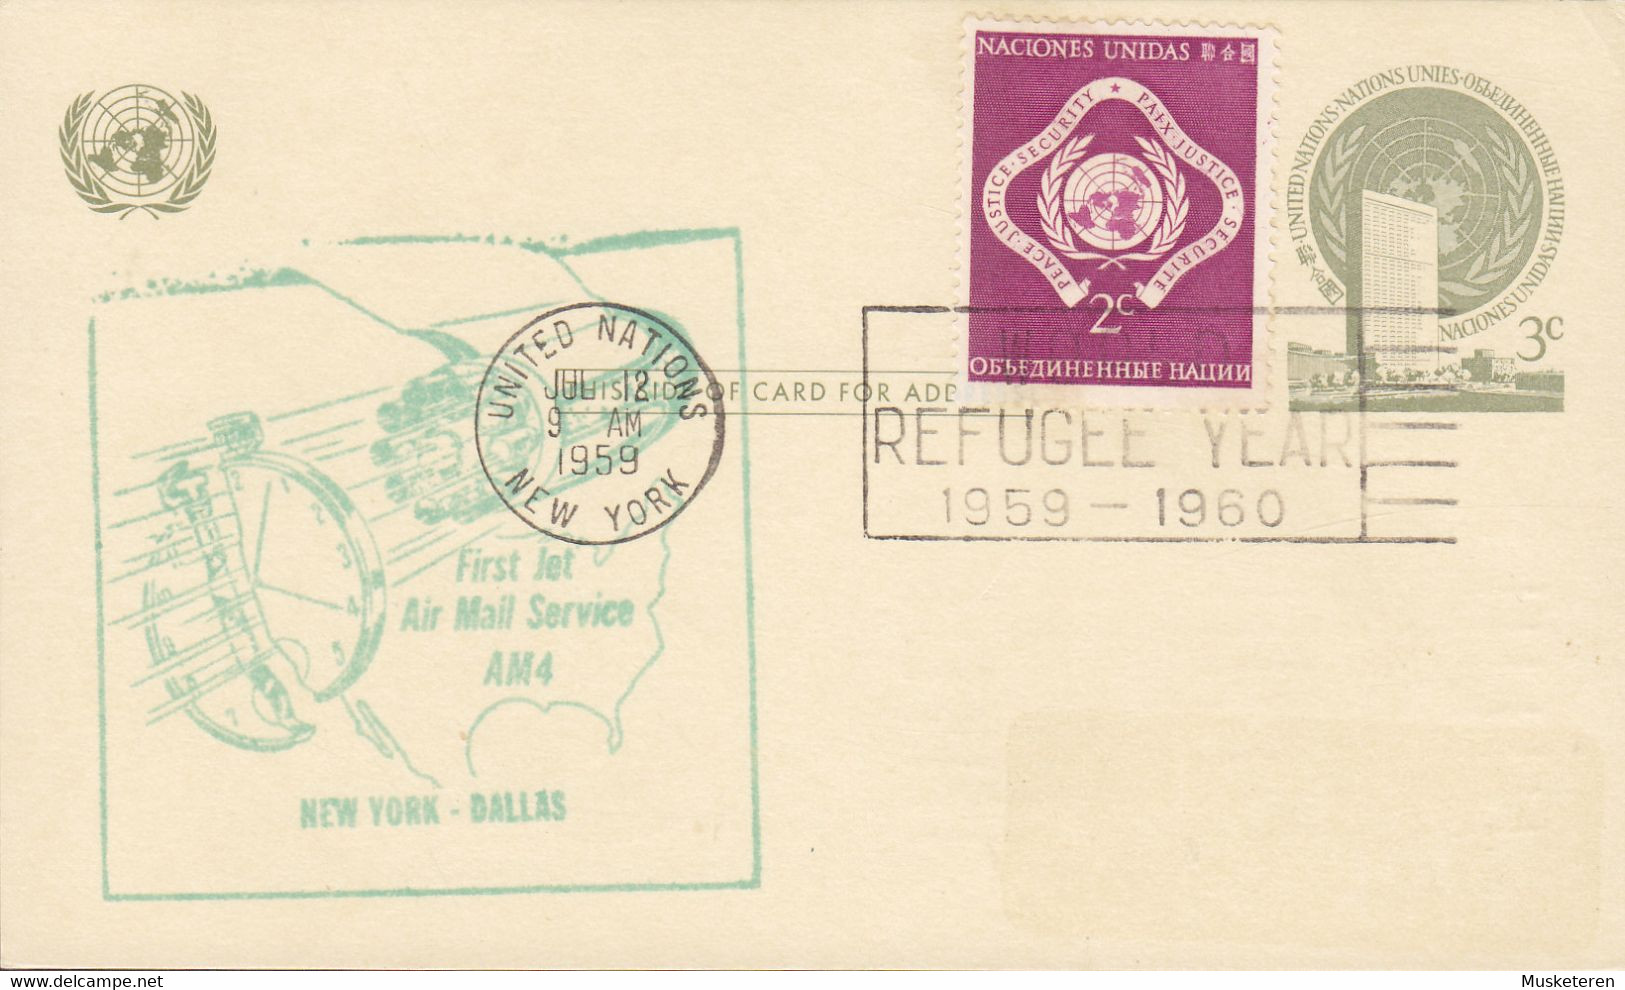 United Nations Uprated Postal Stationery Ganzsache First Jet Air Mail Service Flight NEW YORK - DALLAS, NEW YORK 1959 - Lettres & Documents